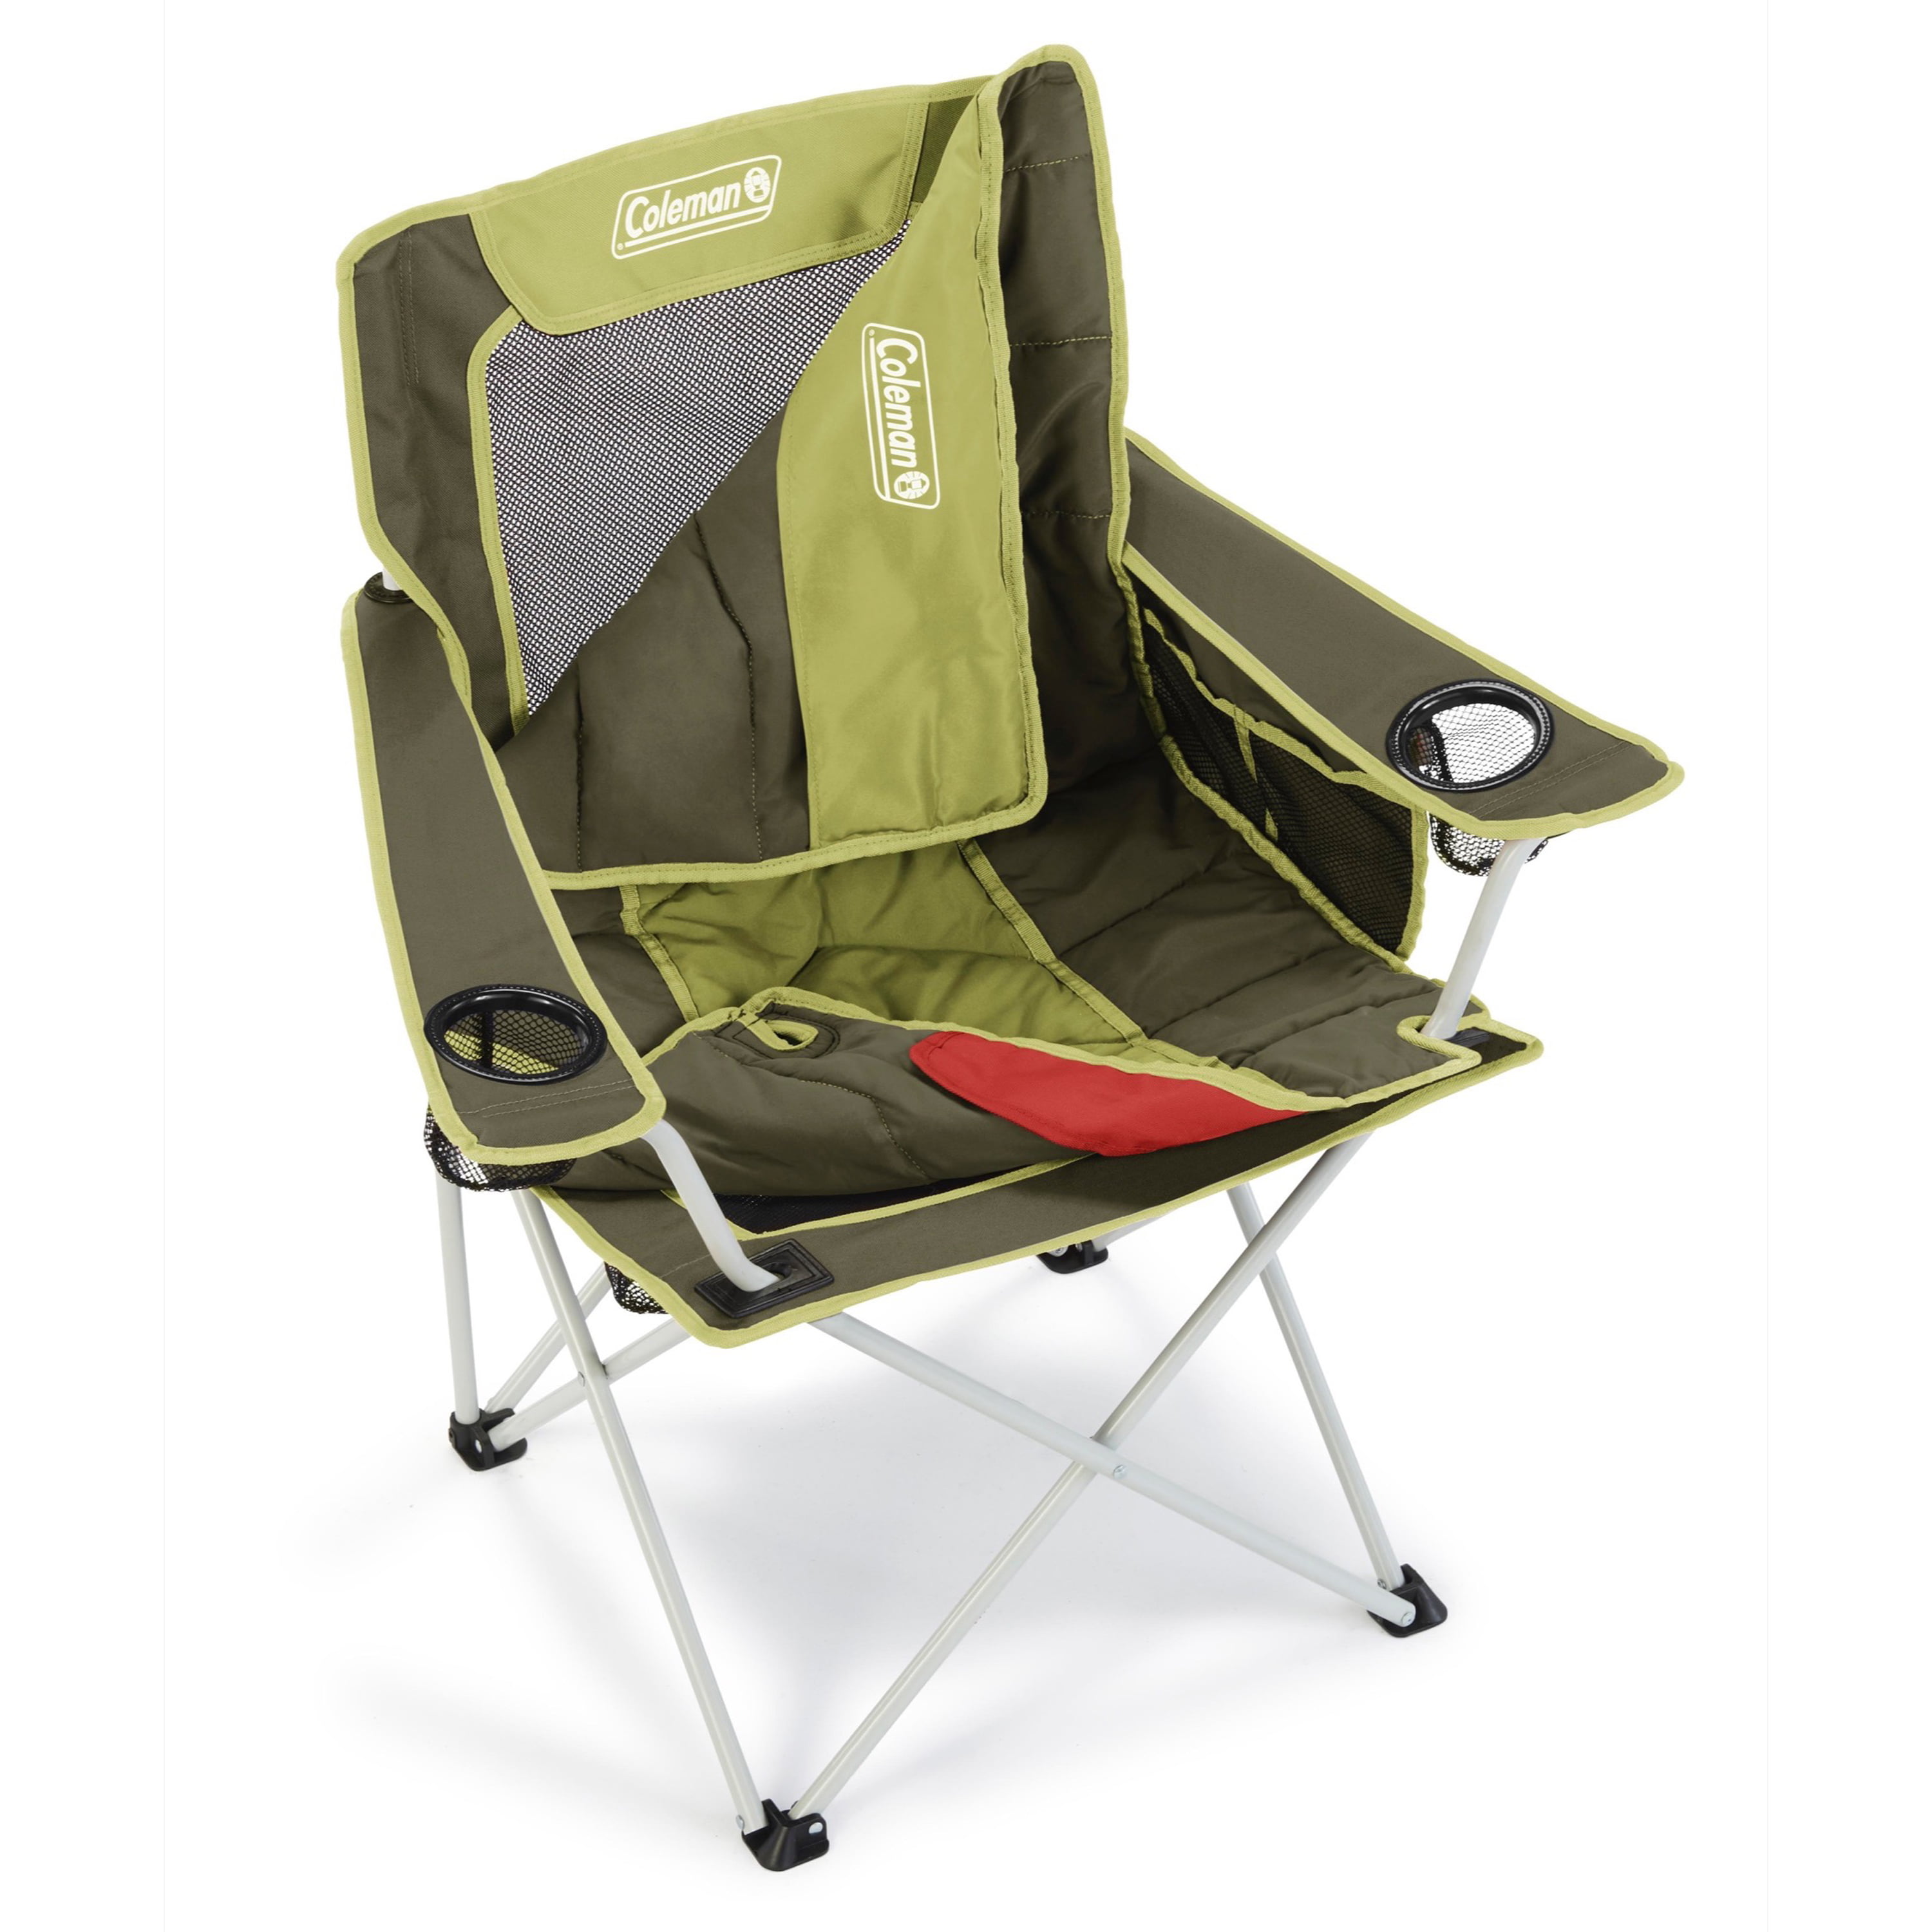 Coleman Folding Chair with Removable Insulated Cover, Cup Holder, Olive